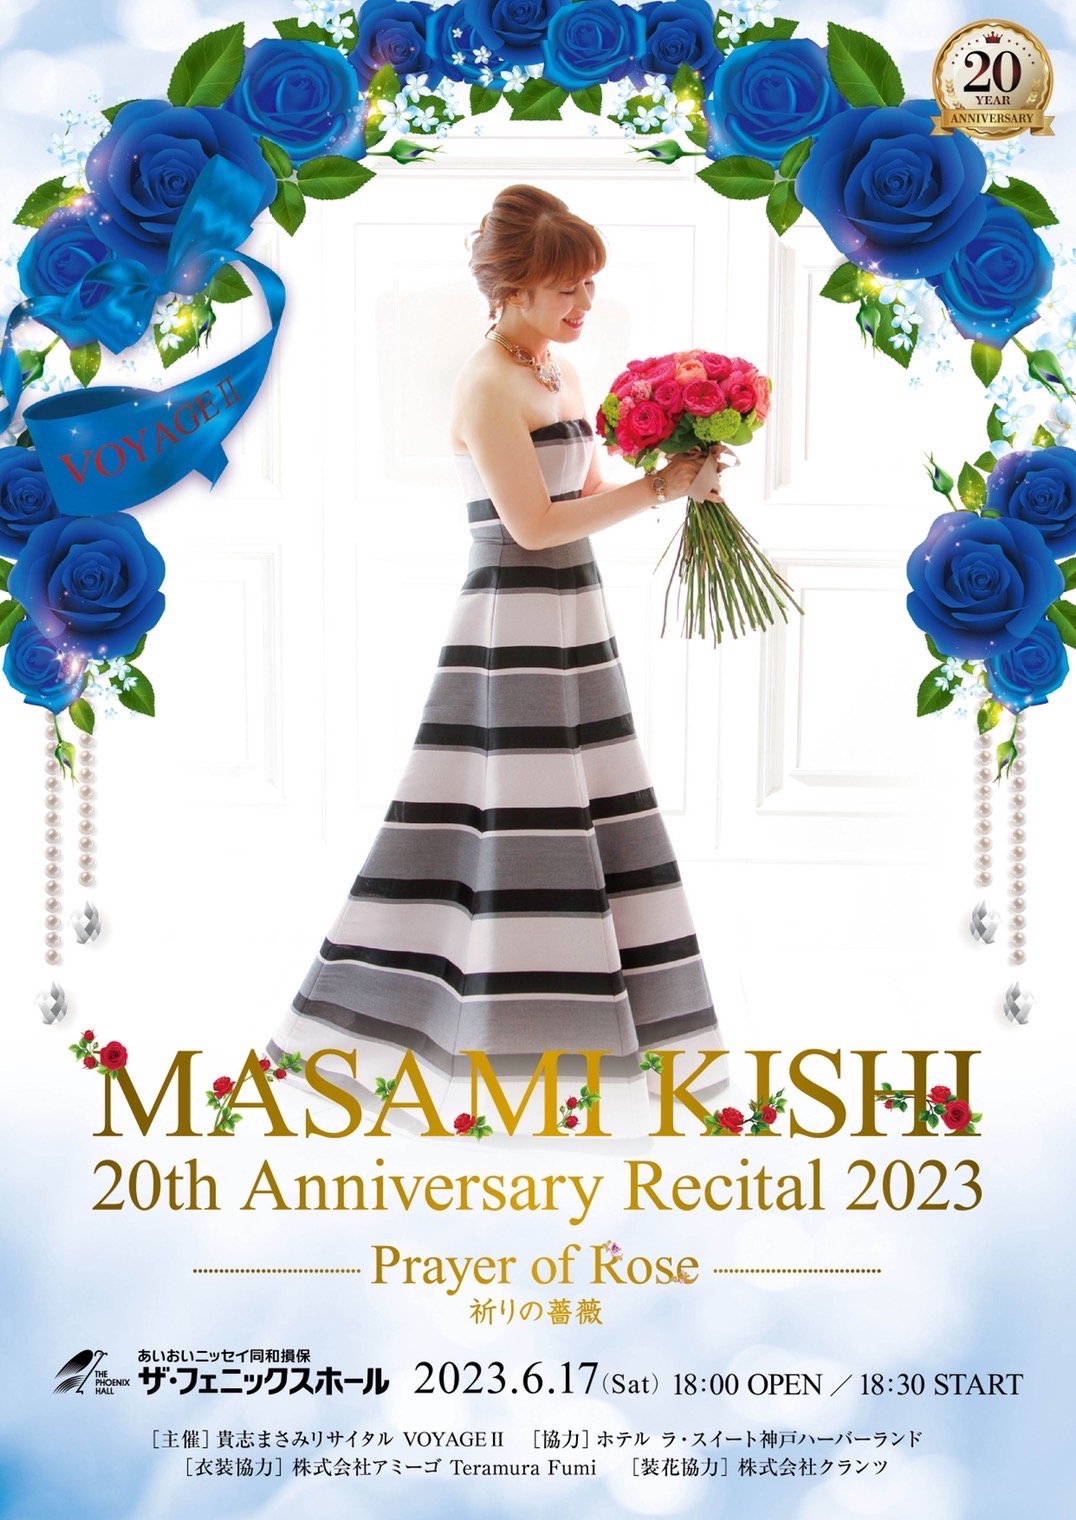 Featured image for “20th Anniversary Recital 2023 Prayer of Rose 祈りの薔薇”